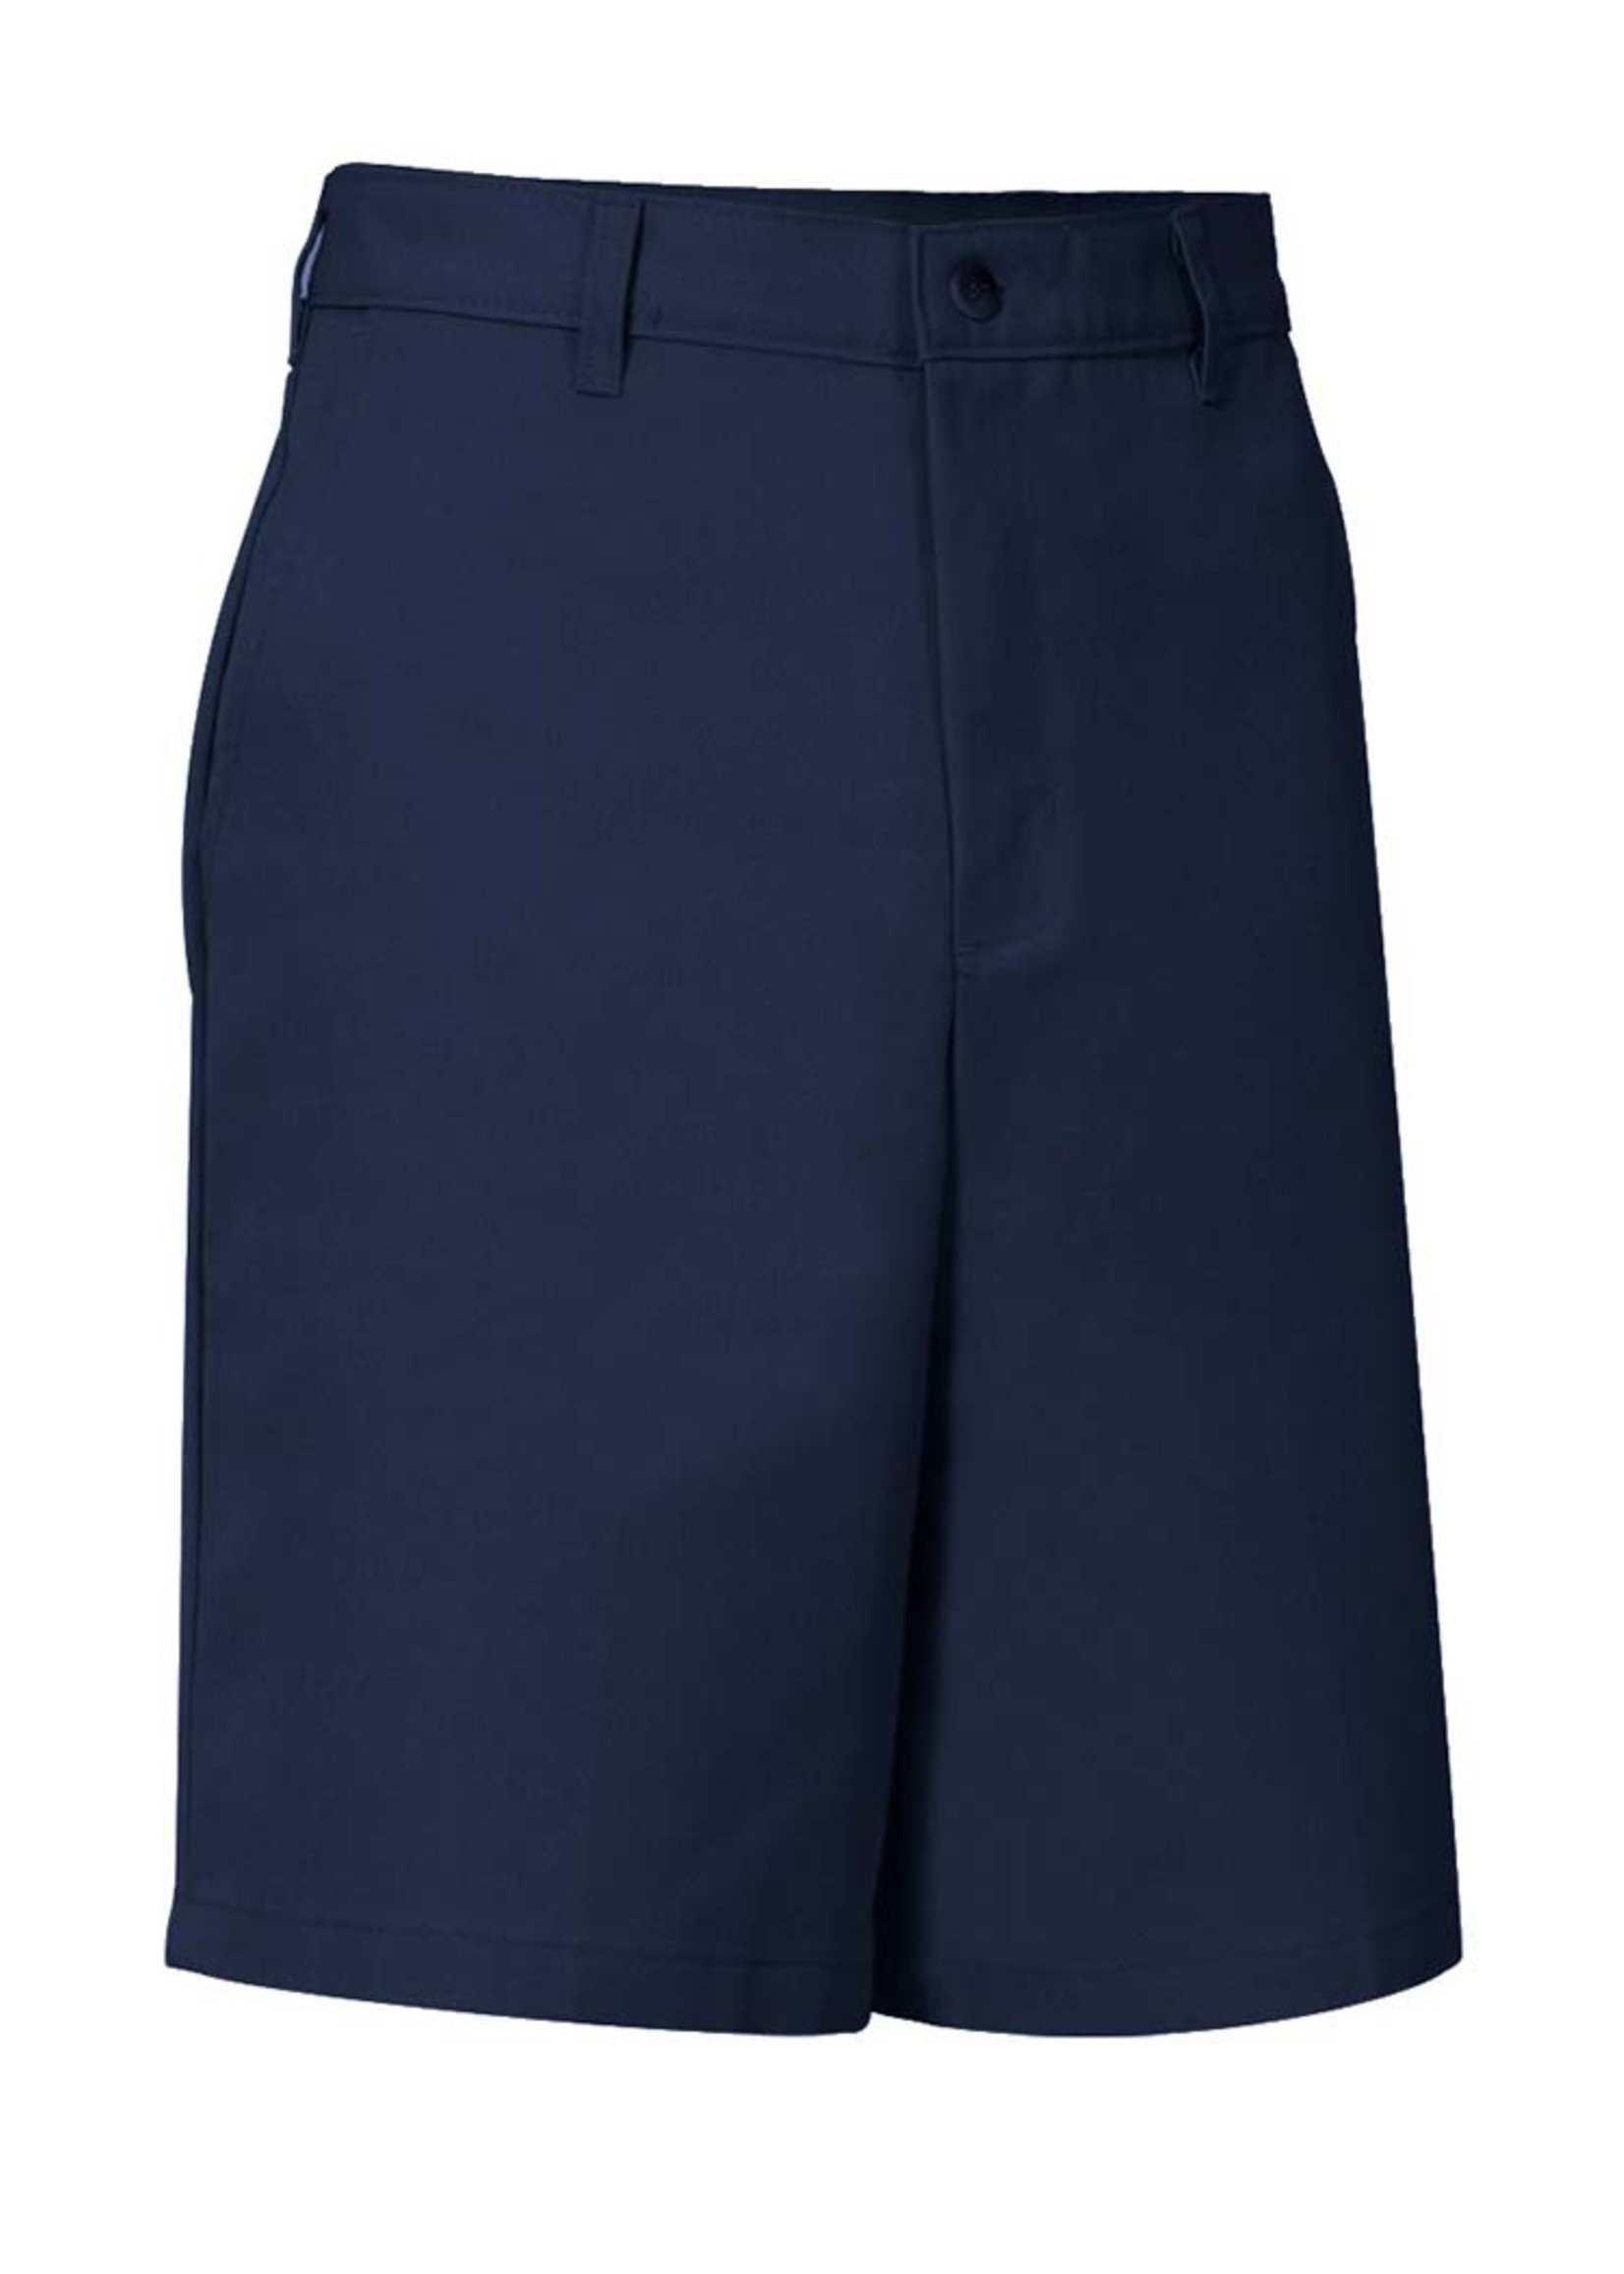 Mens Flat Front Shorts with logo (KN)